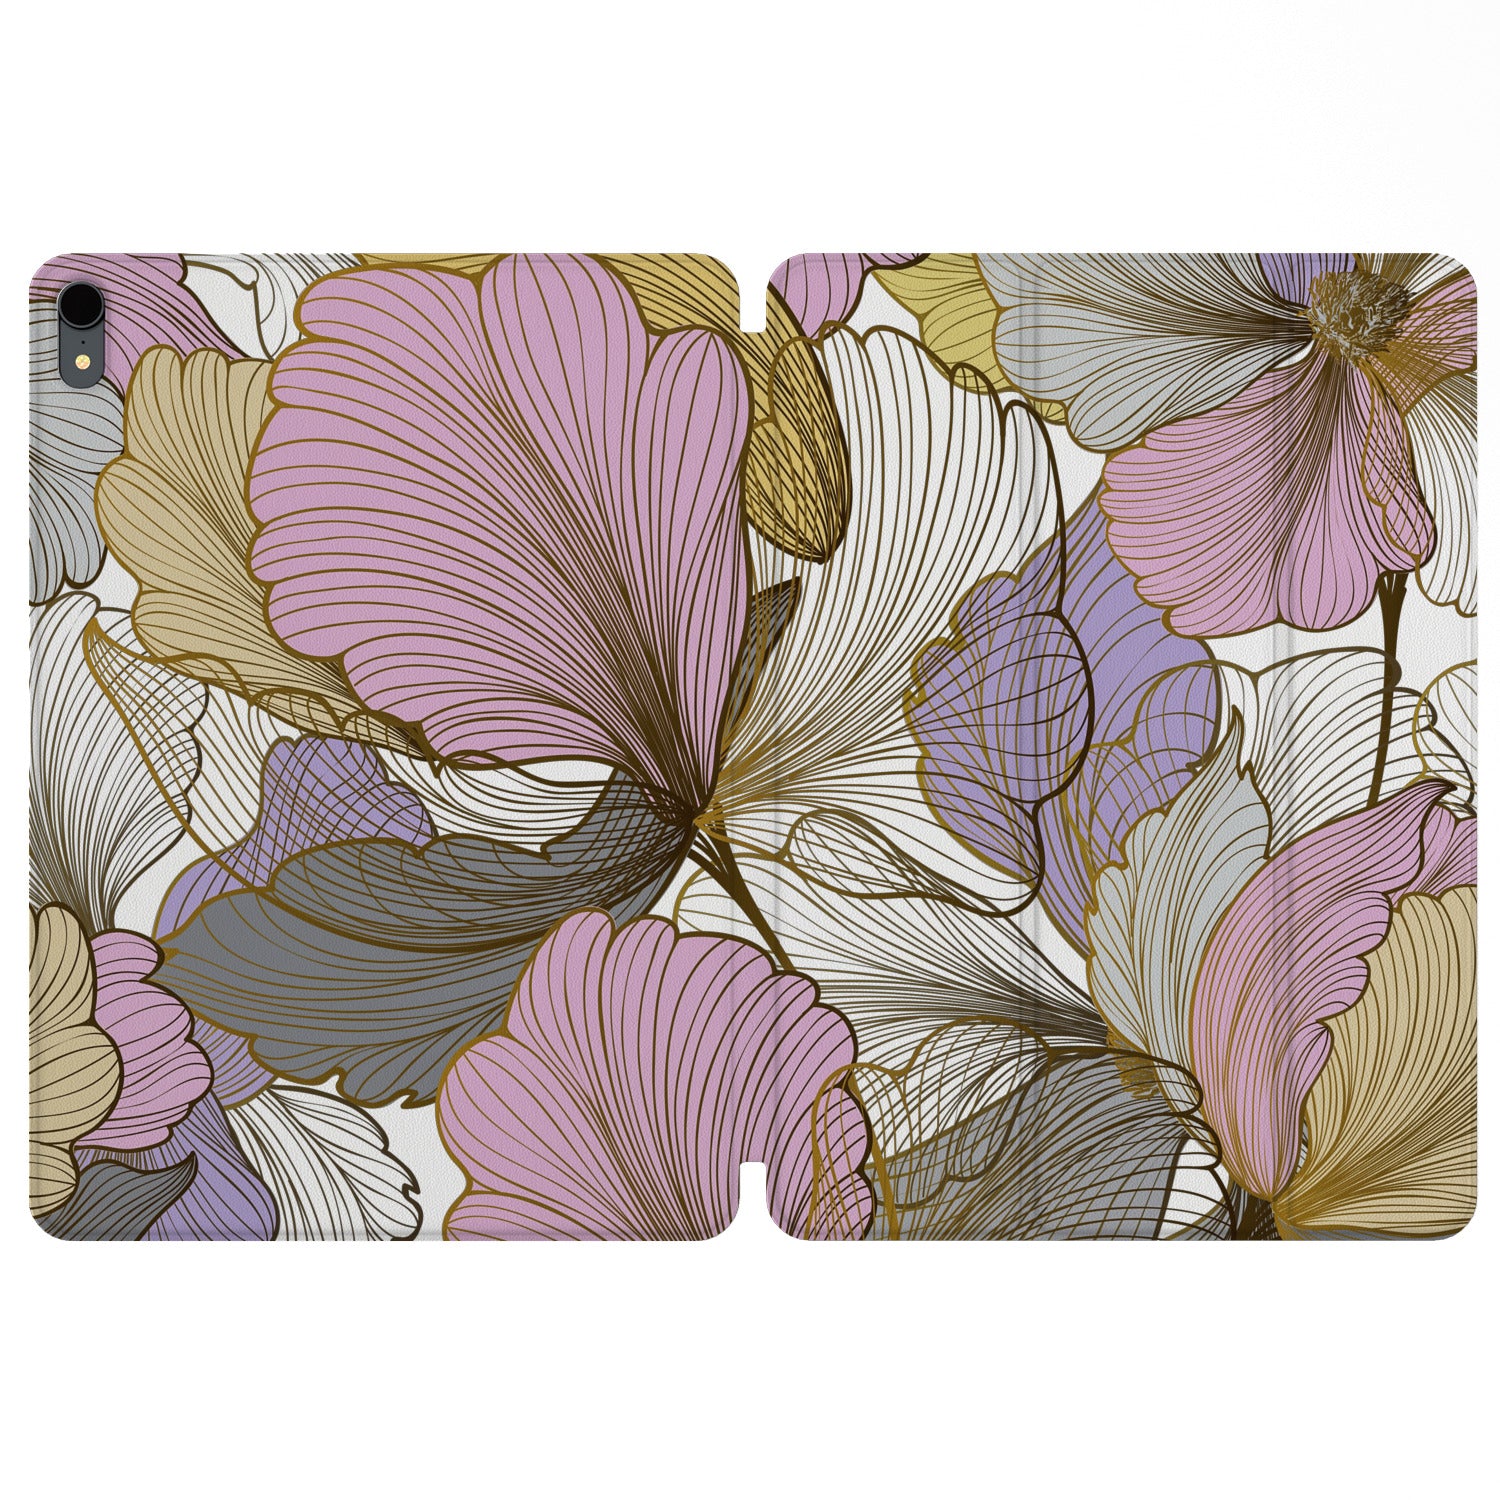 Lex Altern Magnetic iPad Case Abstract Leaves for your Apple tablet.